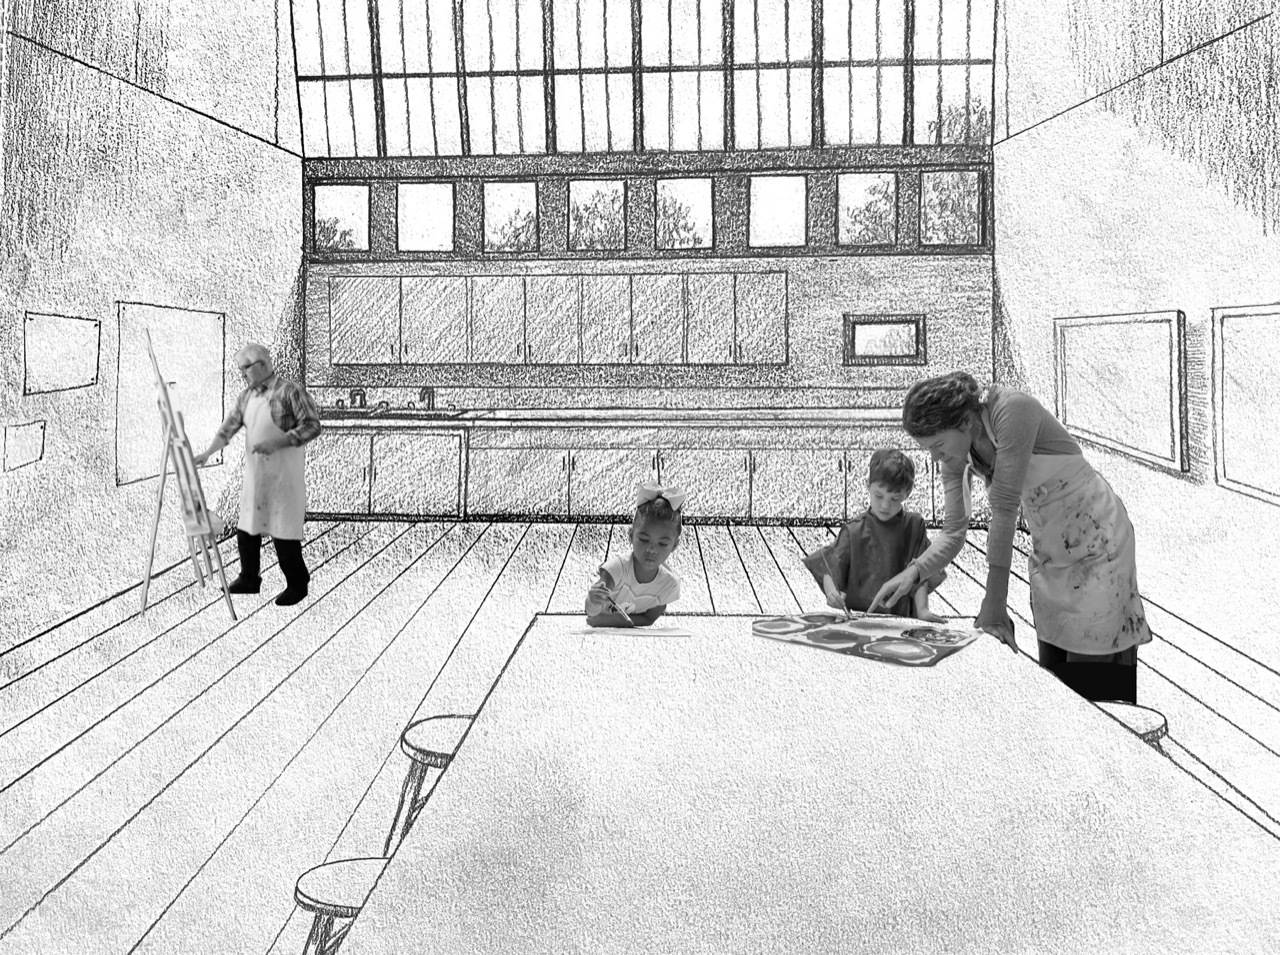 A rendering by artist Scott Bluedorn of how he imagines a workshop space could look in the former studio of painters James Brooks and Charlotte Park. SCOTT BLUEDORN